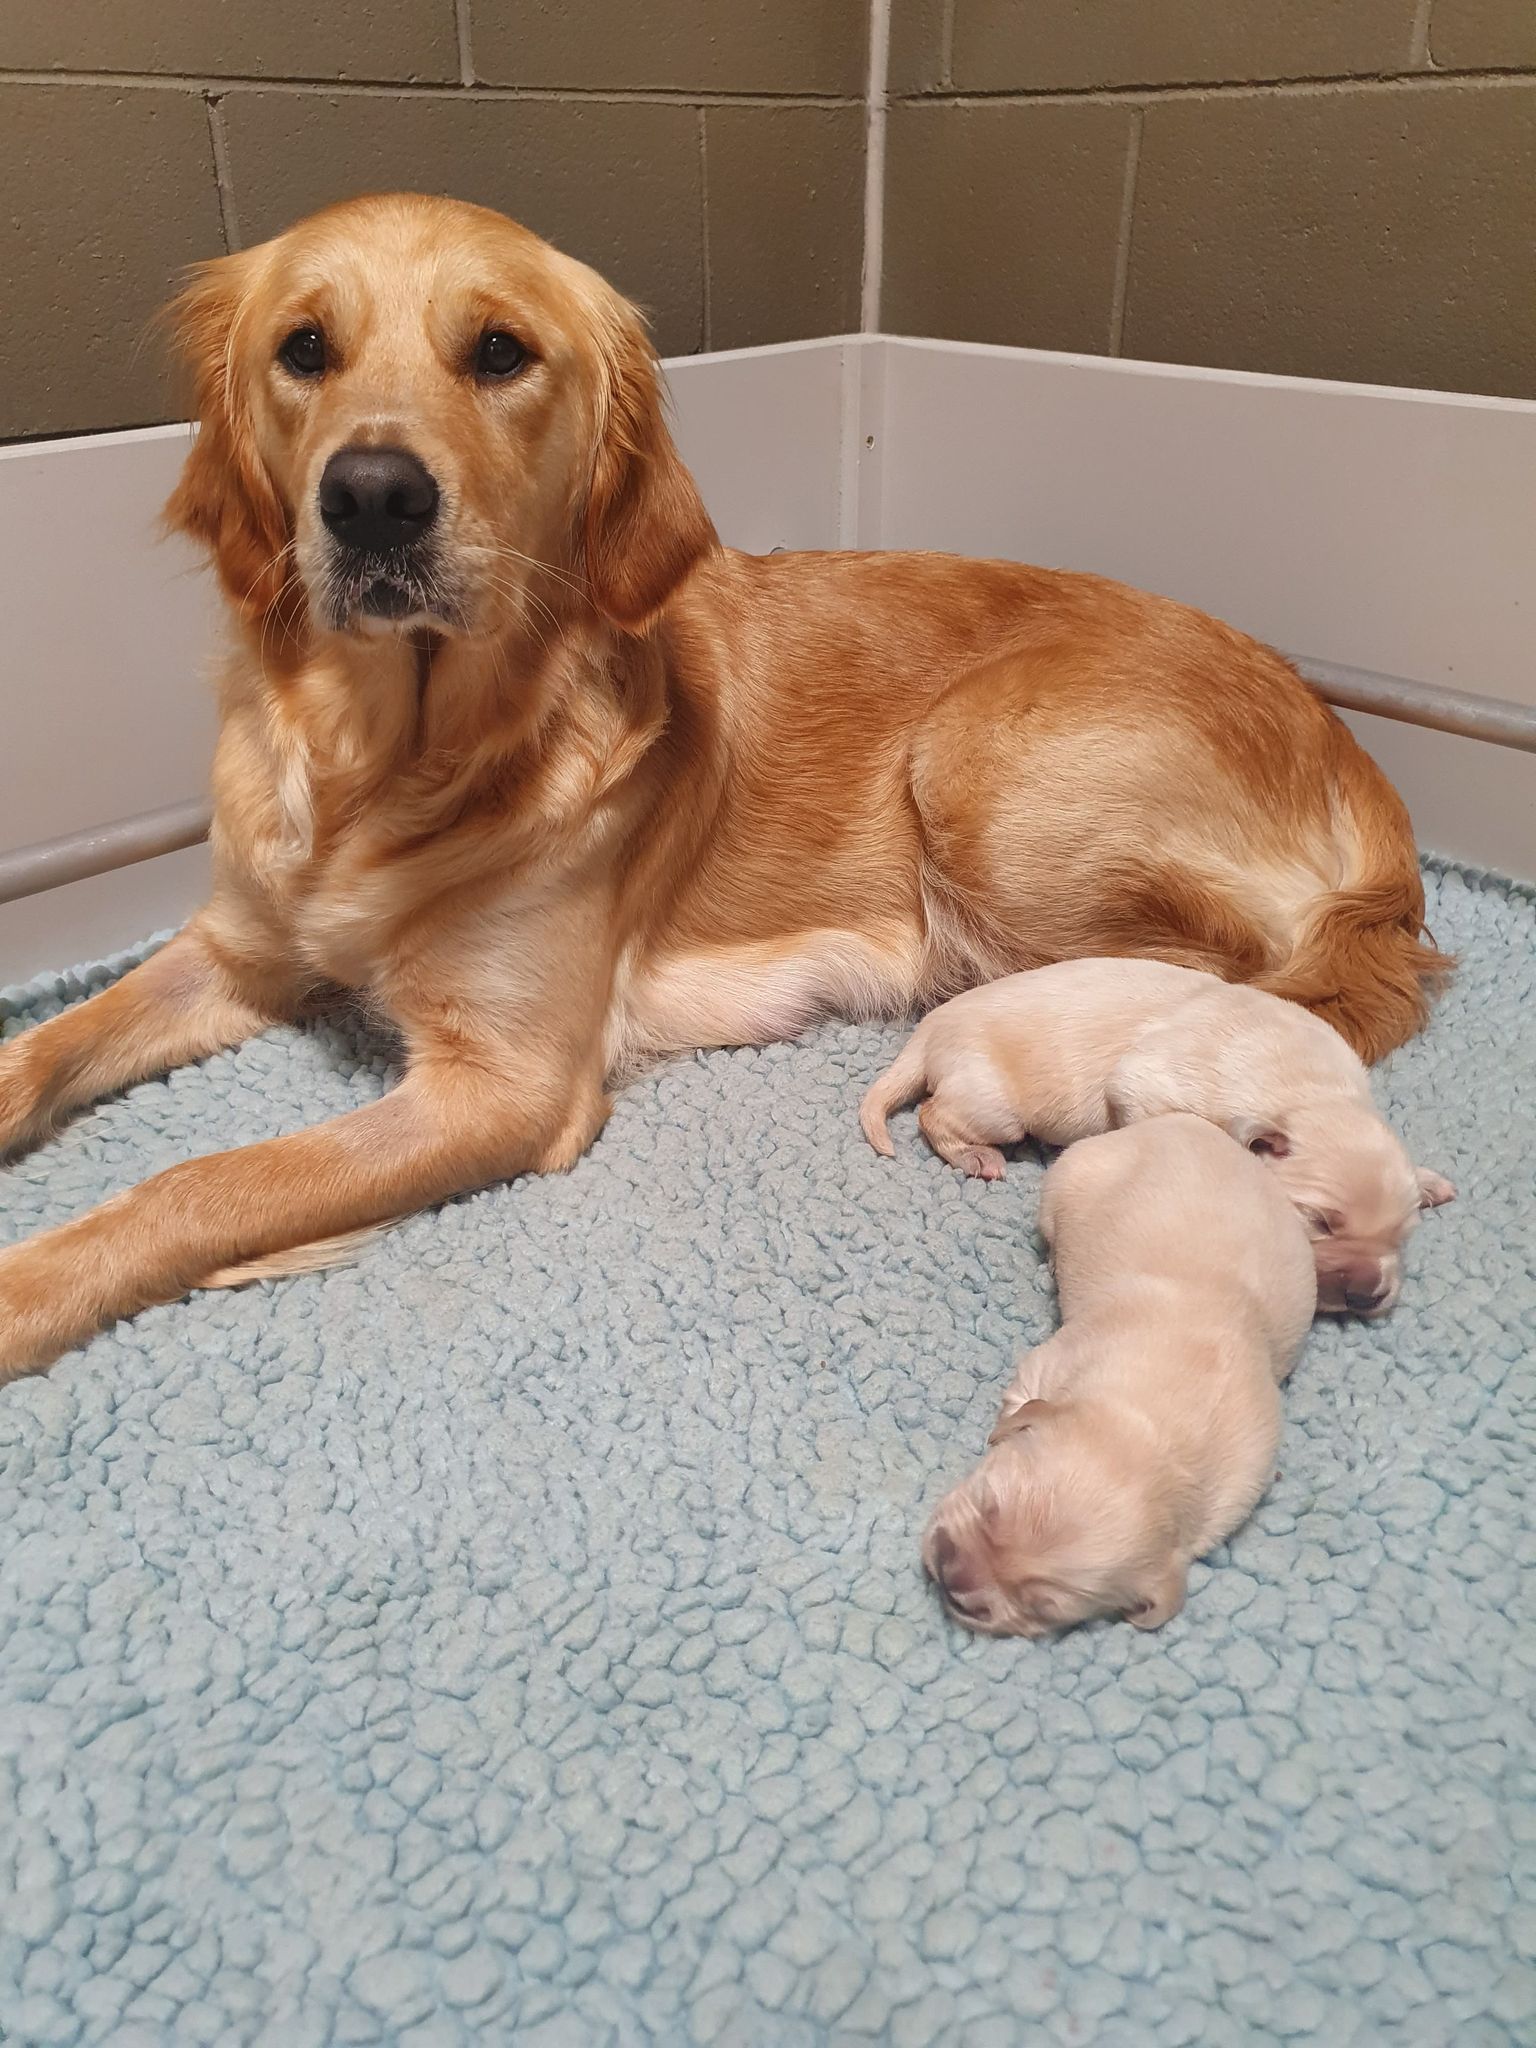 Olive, a golden retriever, lies nicely next to two of her golden pups